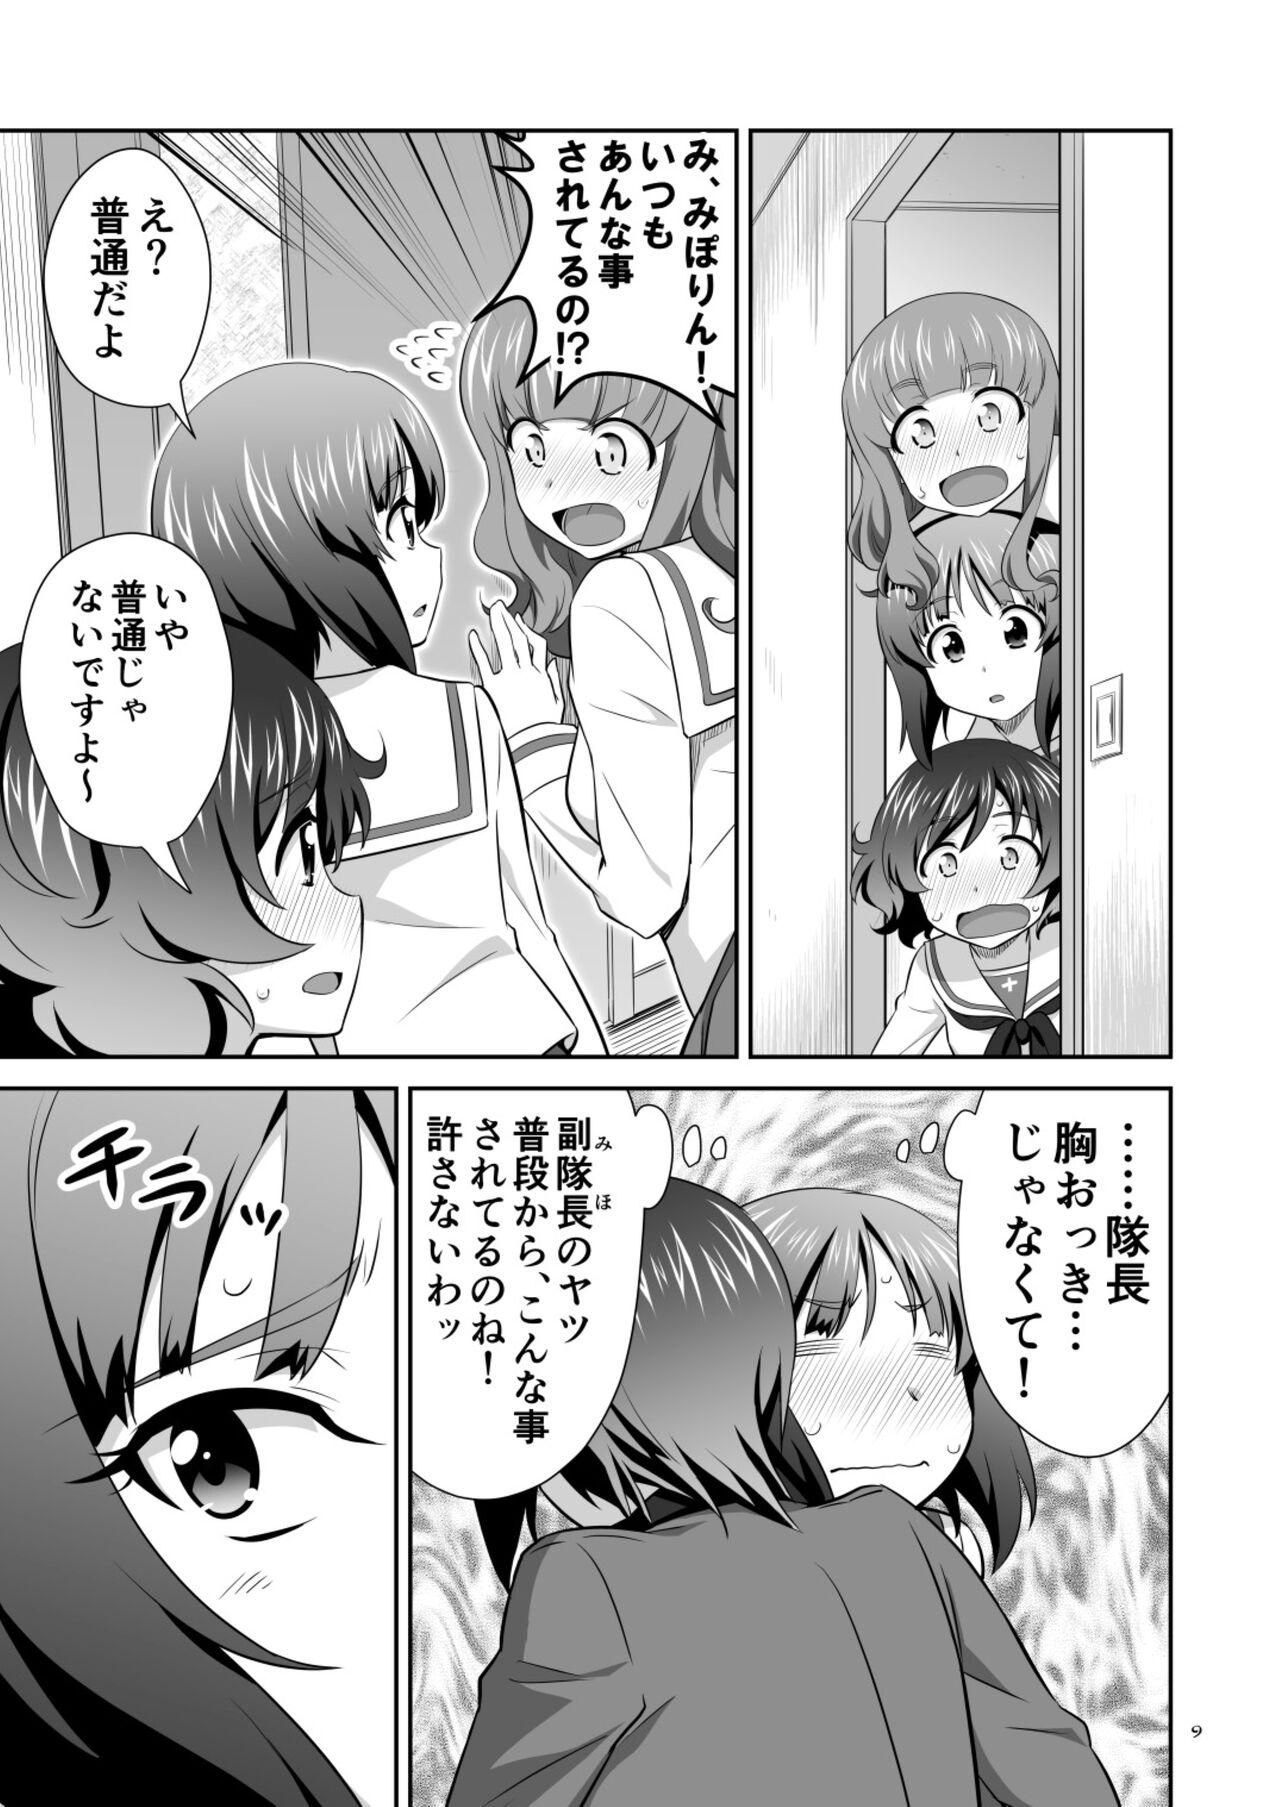 Hairy Sexy ツリ目道3 - Girls und panzer Real Orgasms - Page 9